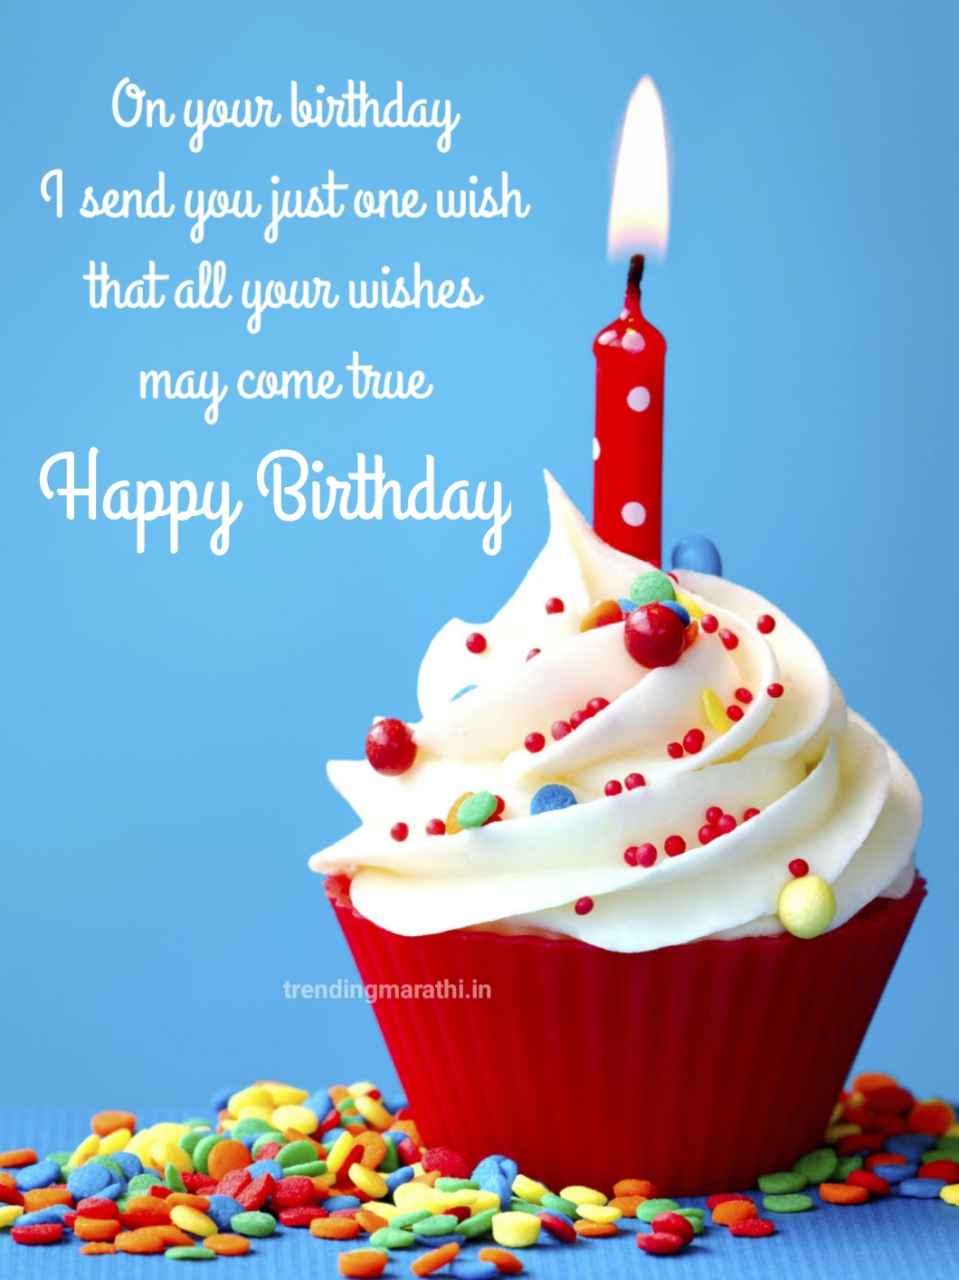 Best Happy Birthday Wishes in English with cake images